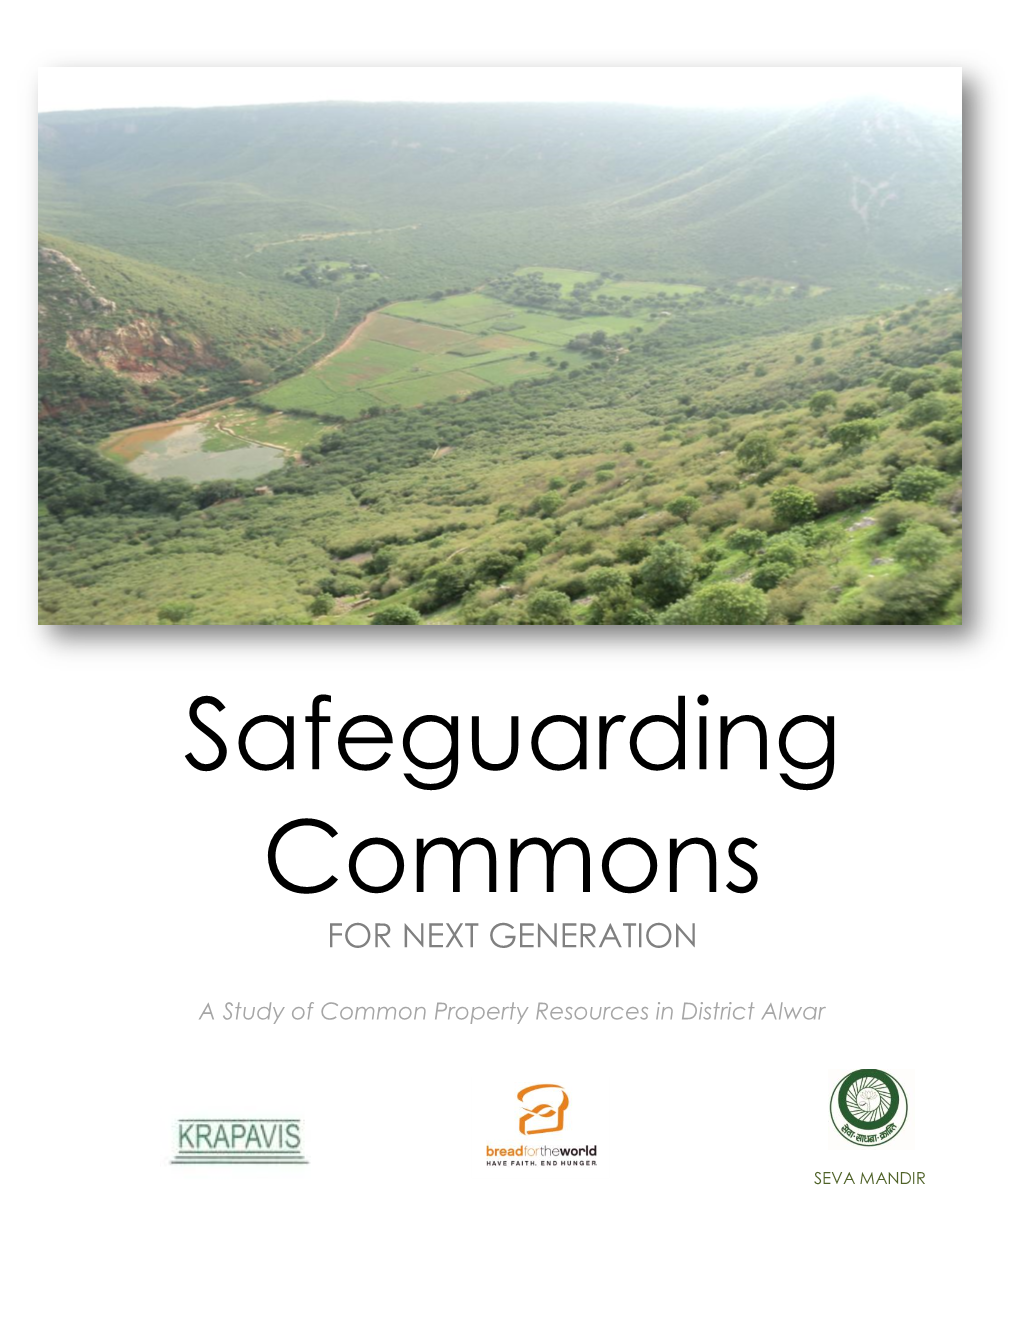 Safeguarding Commons for NEXT GENERATION